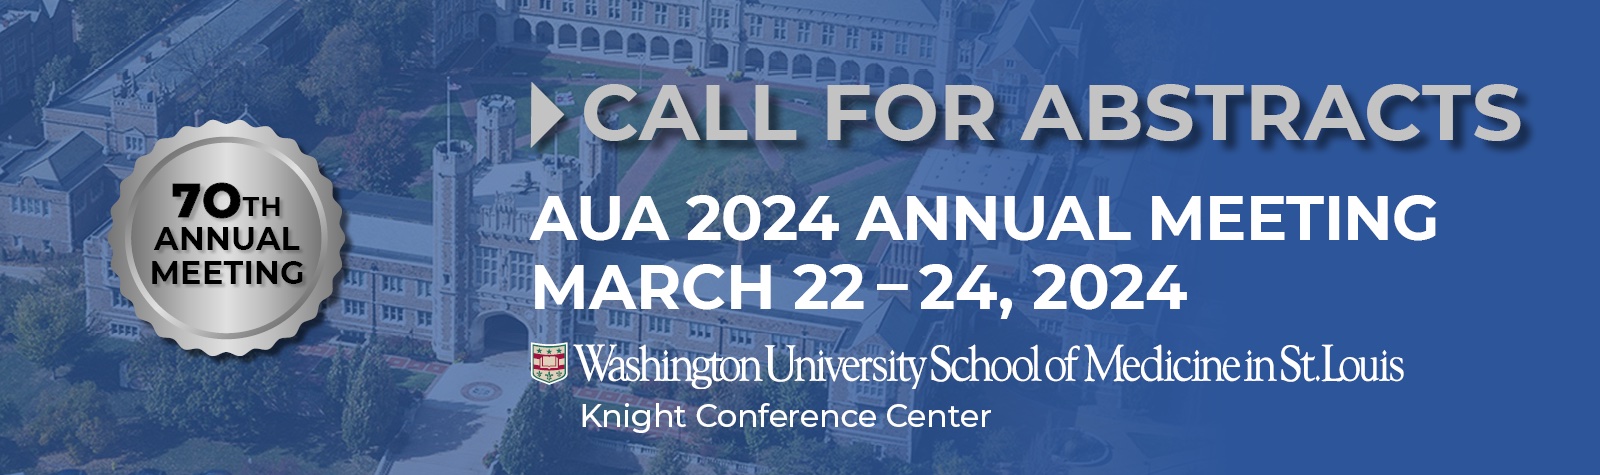 AUA Annual Meeting Call for Abstracts Image